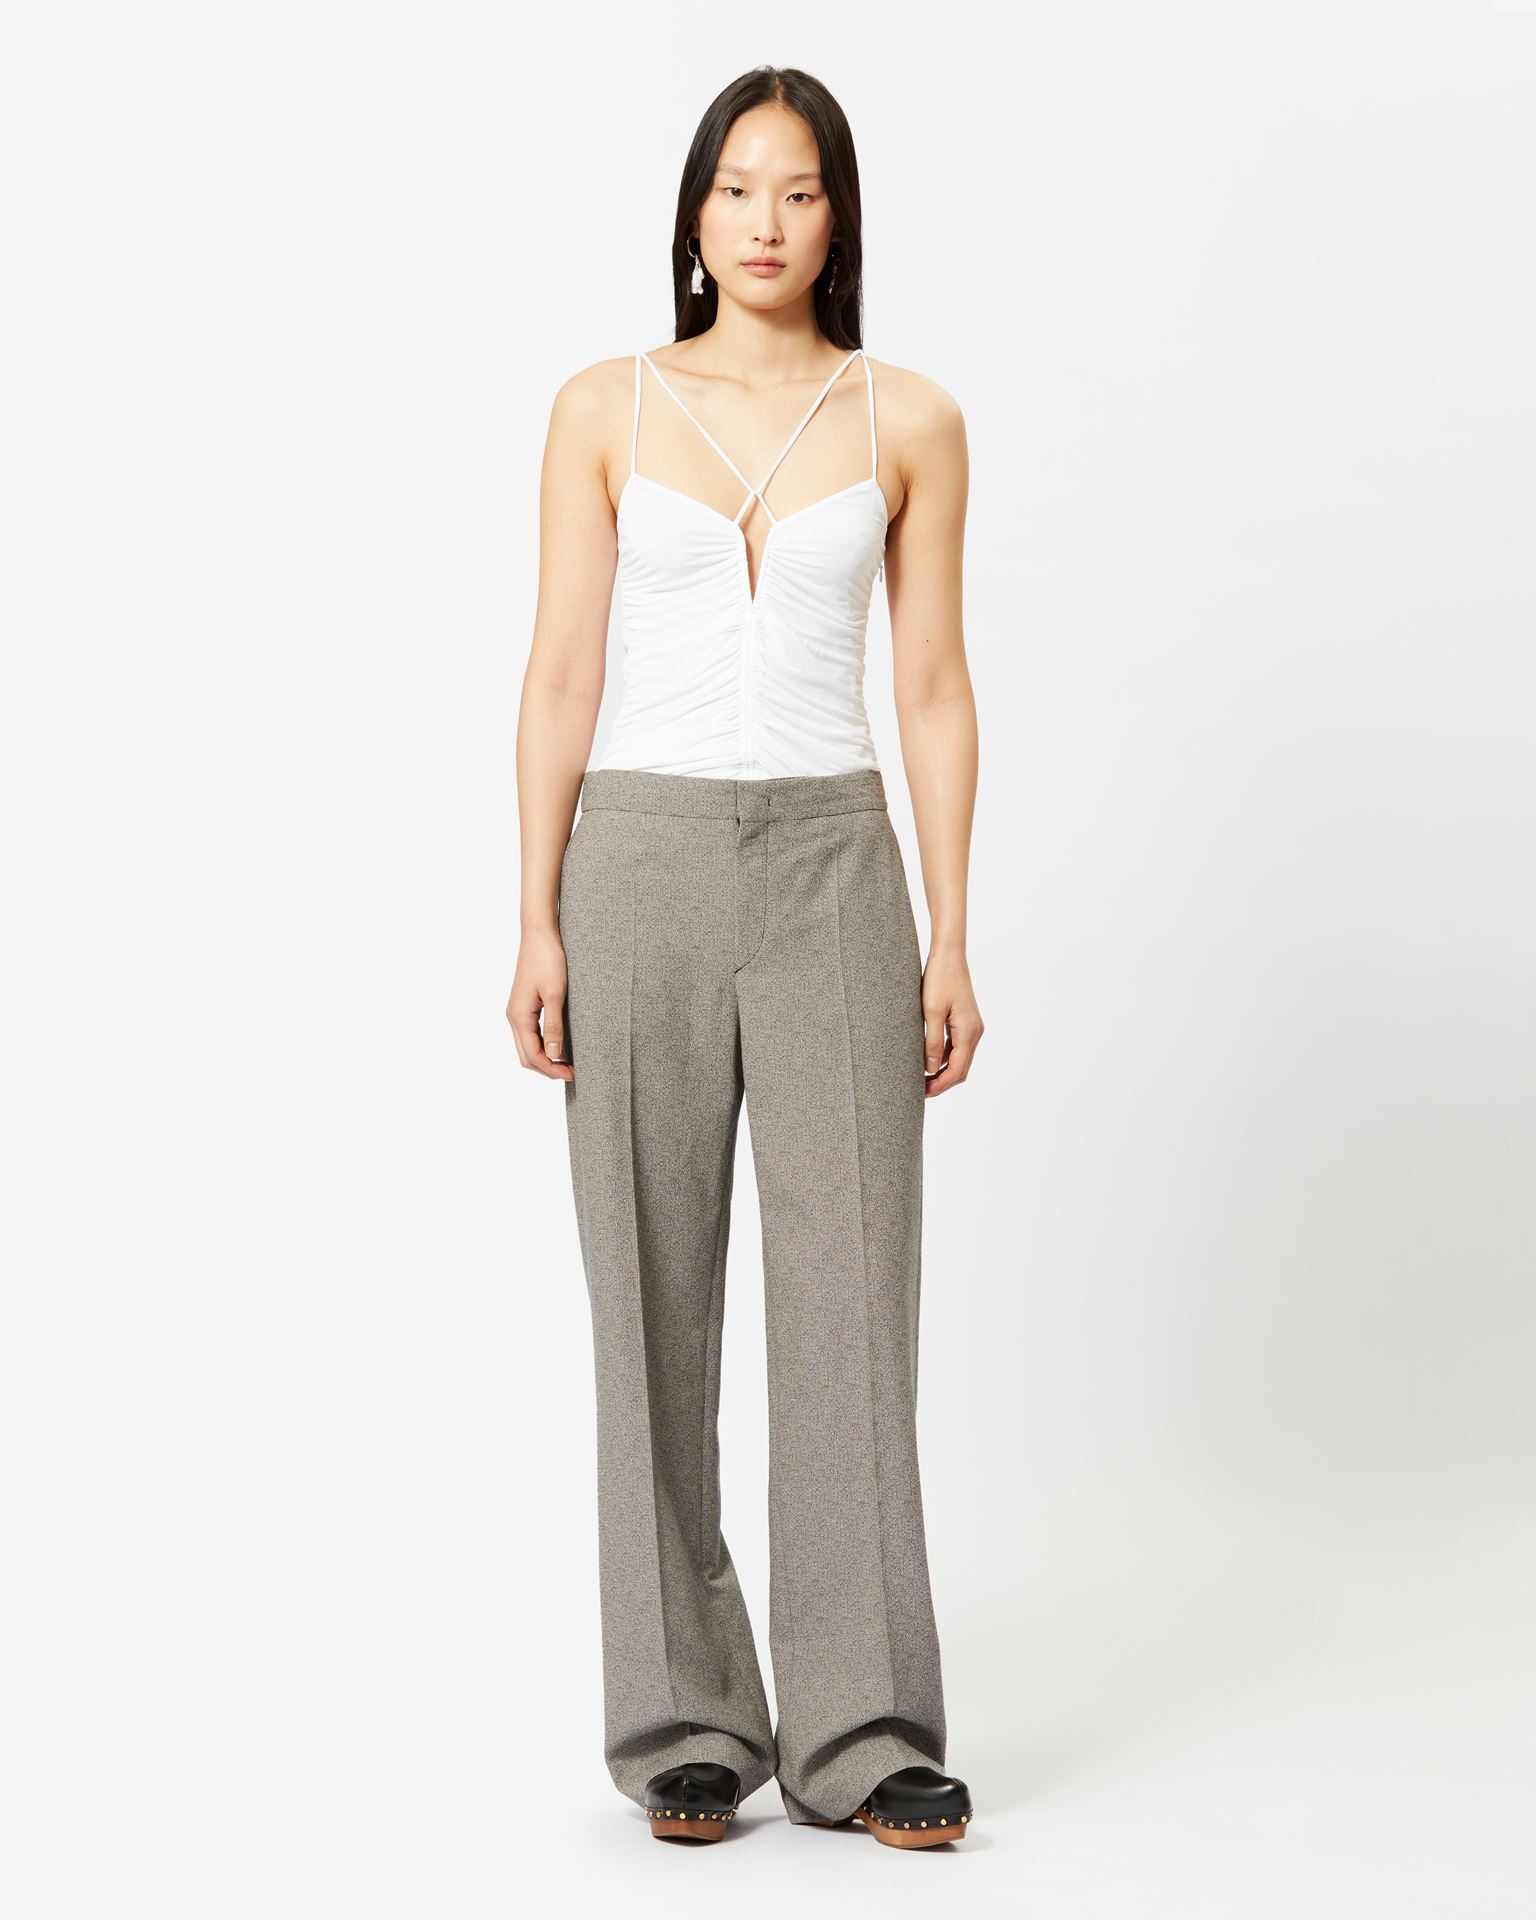 Isabel Marant, Scarly Trousers - Women - White